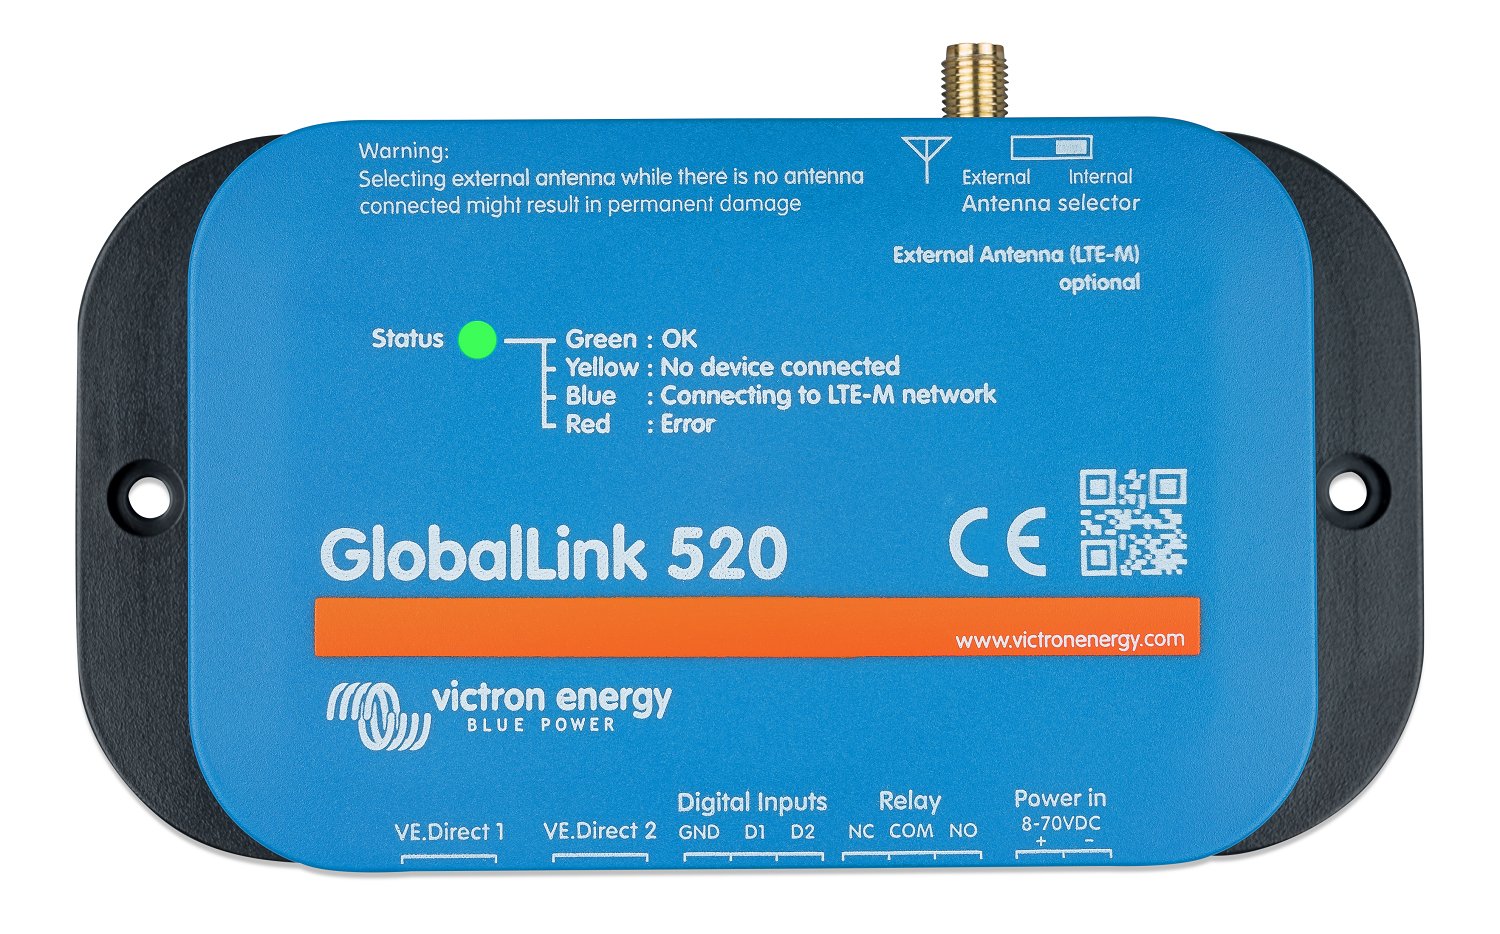 What is the power consumption of the GlobalLink 520?